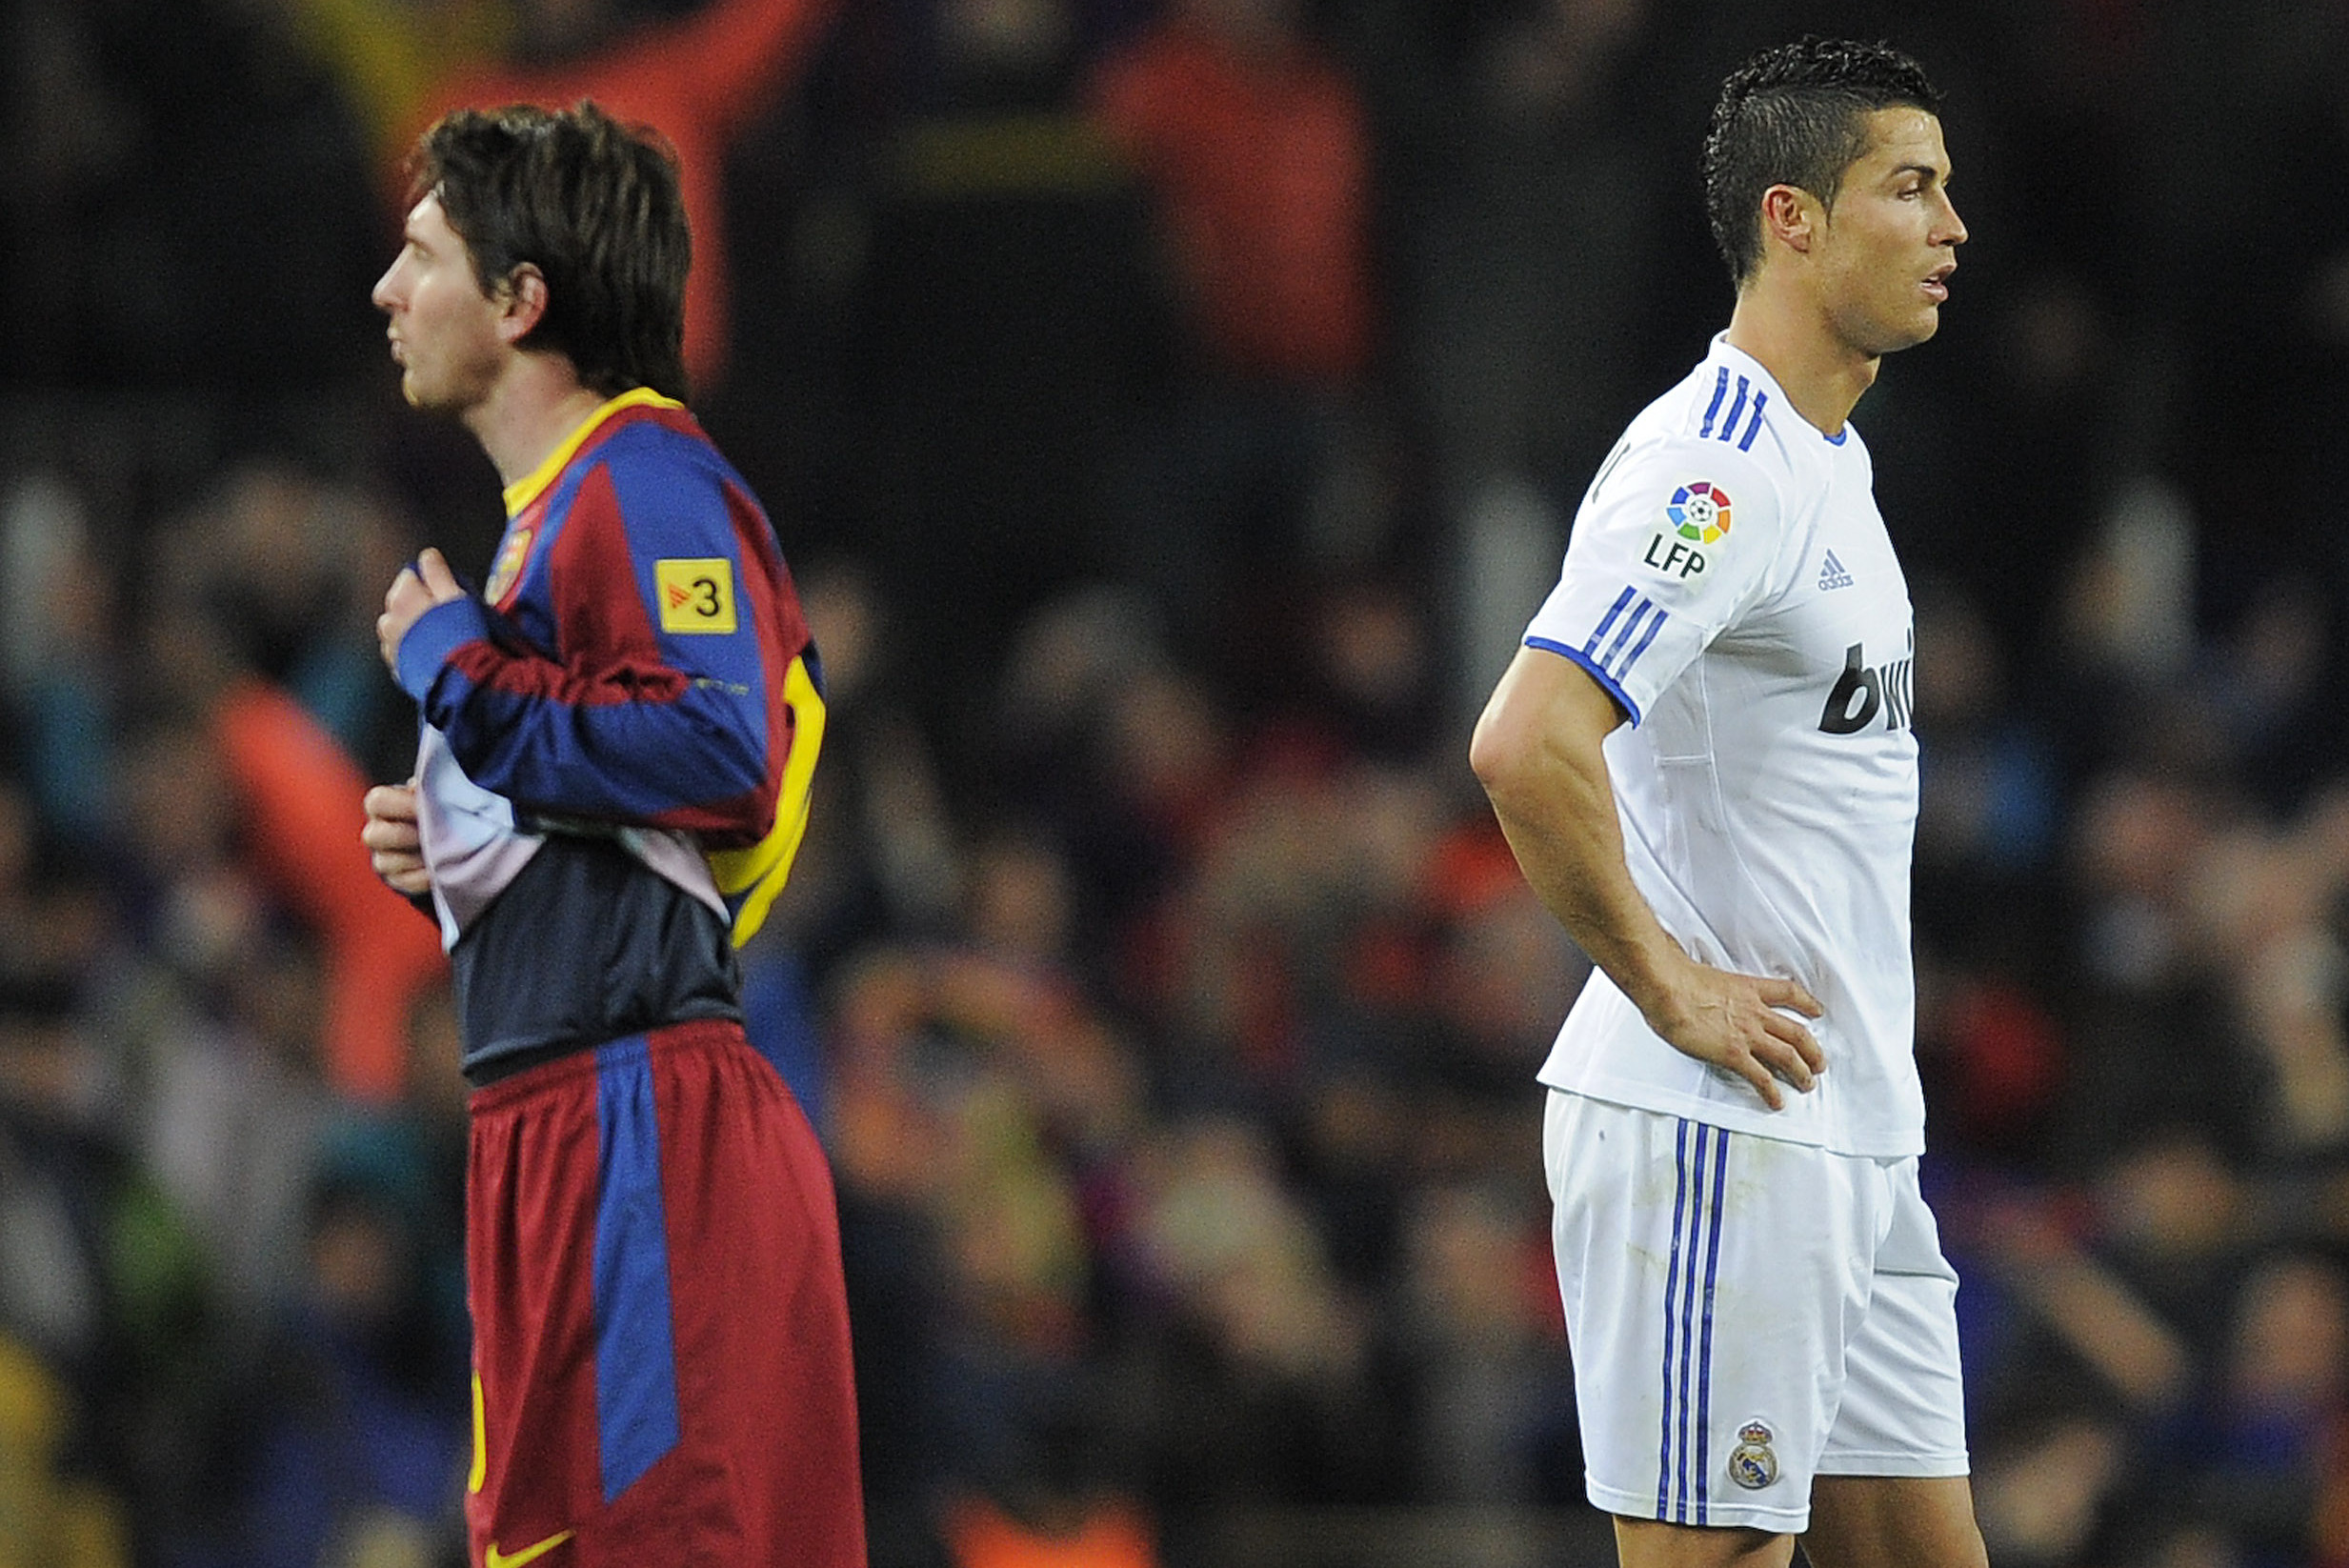 Top 15 Pictures of Lionel Messi and Cristiano Ronaldo